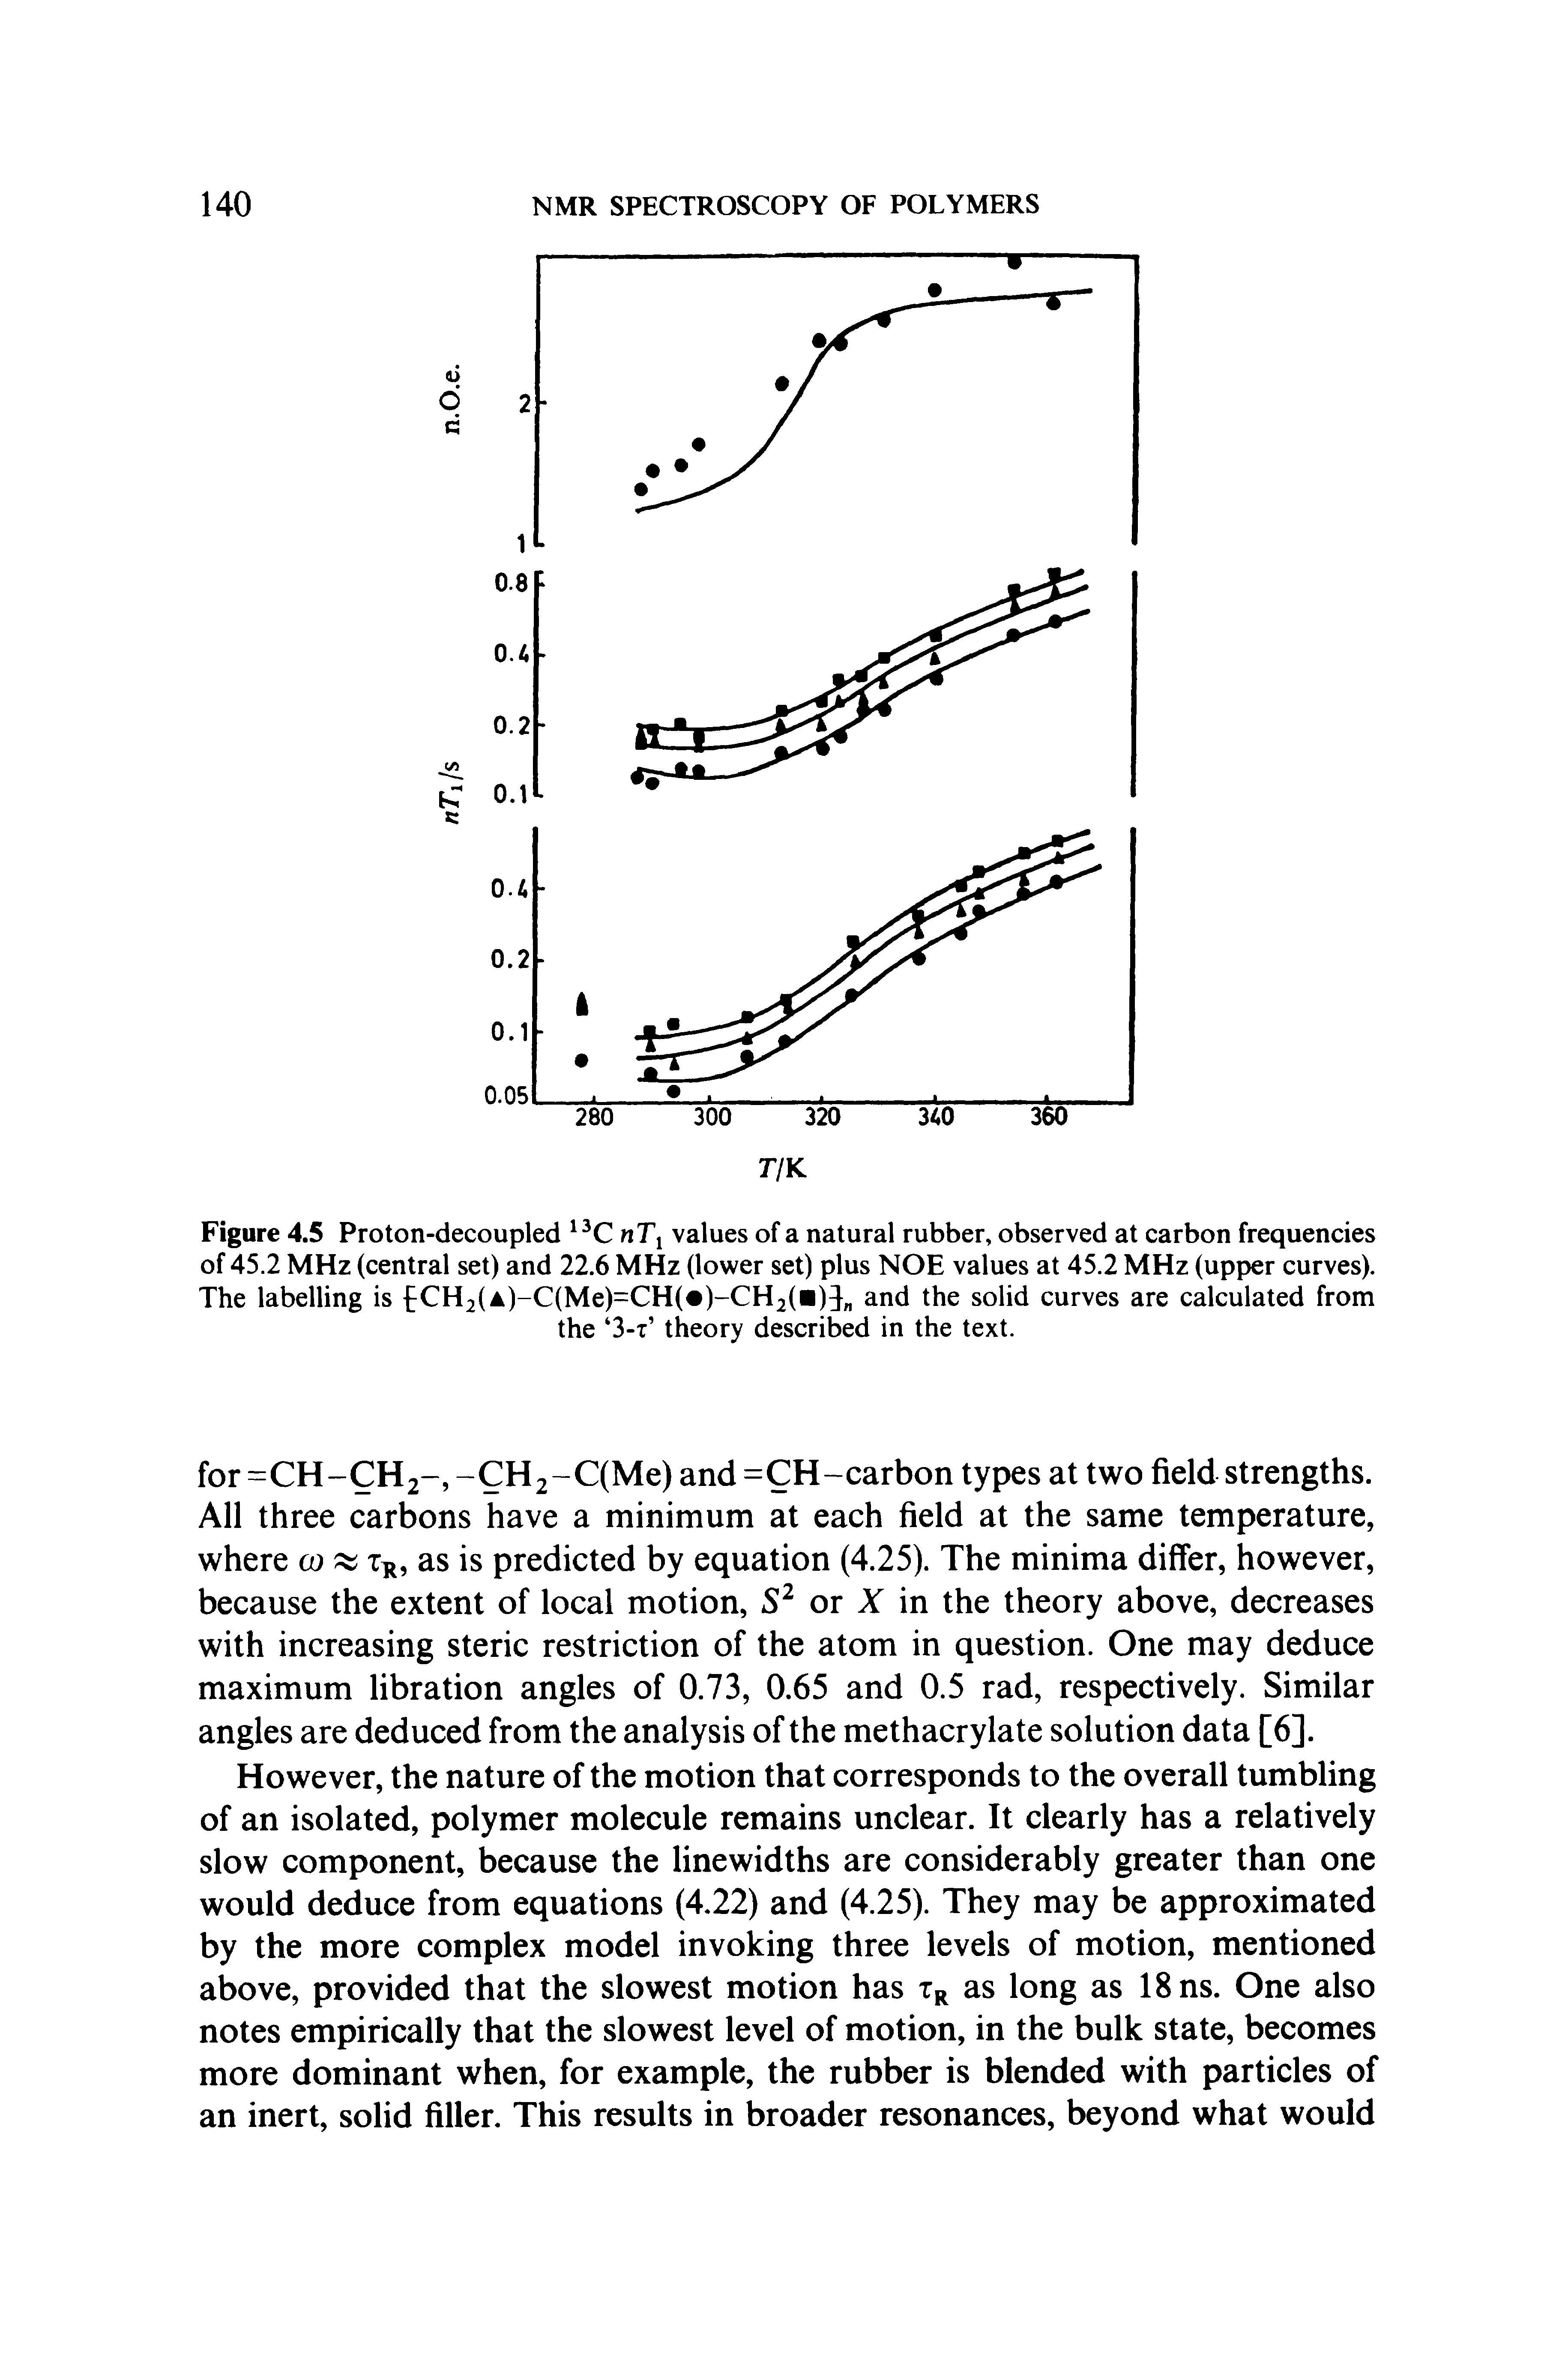 Figure 4.5 Proton-decoupled CnTi values of a natural rubber, observed at carbon frequencies of 45.2 MHz (central set) and 22.6 MHz (lower set) plus NOE values at 45.2 MHz (upper curves). The labelling is f CH2(A)-C(Me)=CH( )-CH2( ) and the solid curves are calculated from the 3-t theory described in the text.